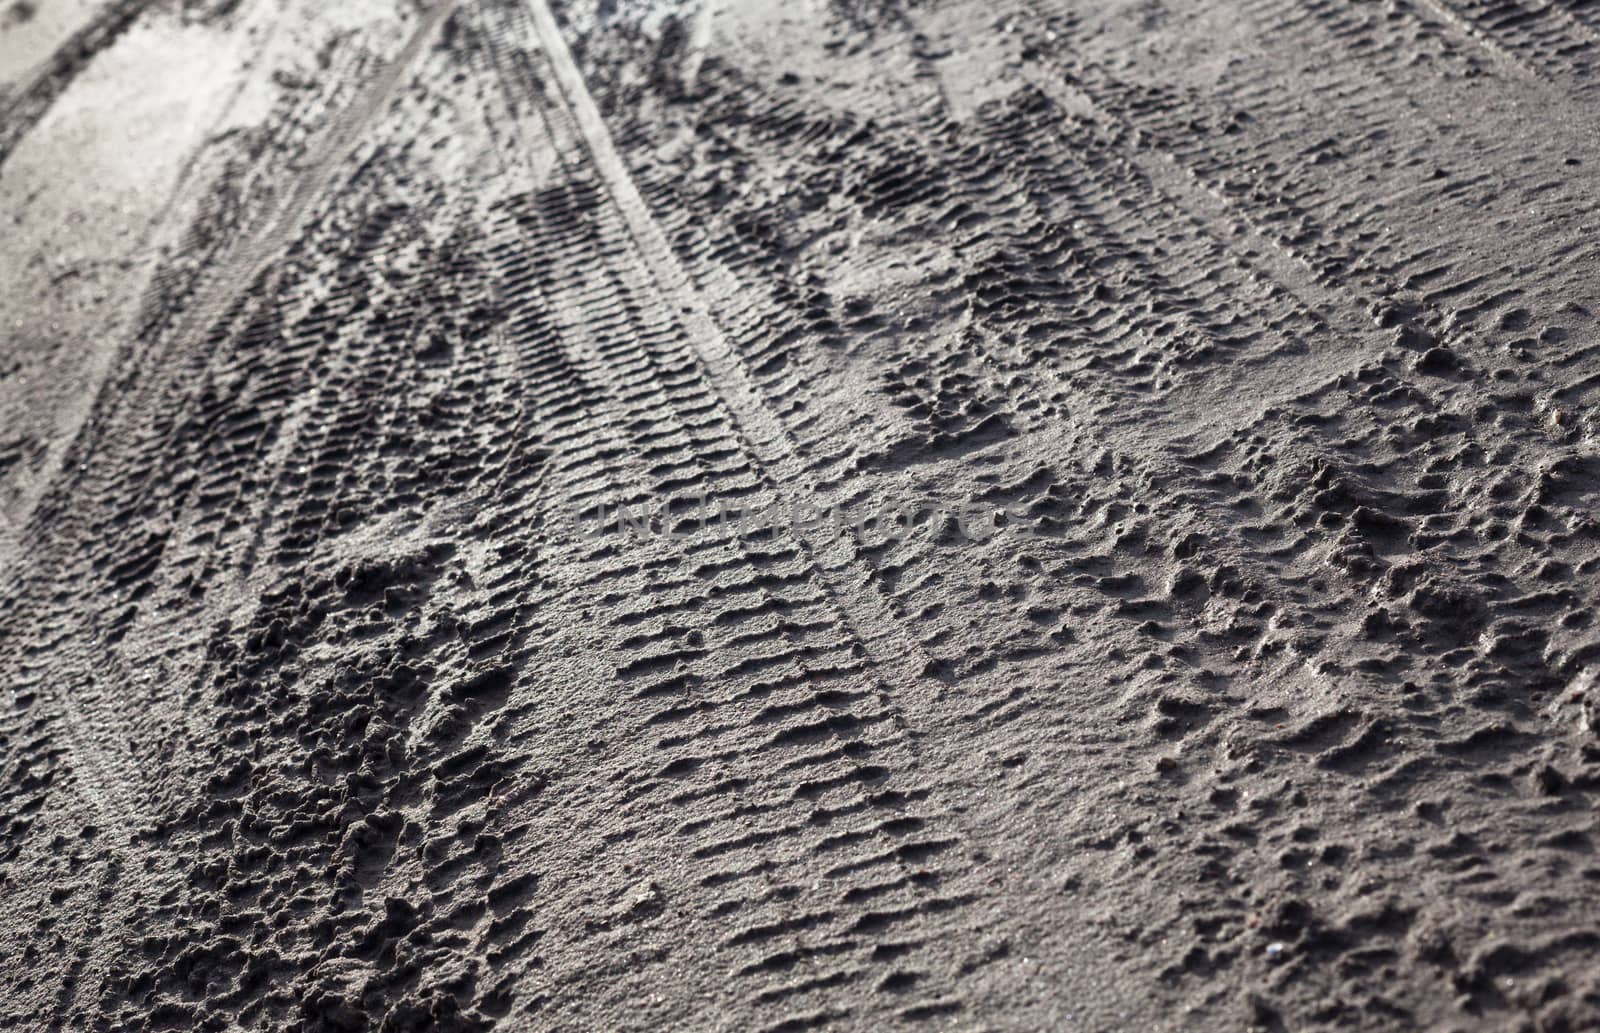 Wheel tracks on the dirt road after the rain